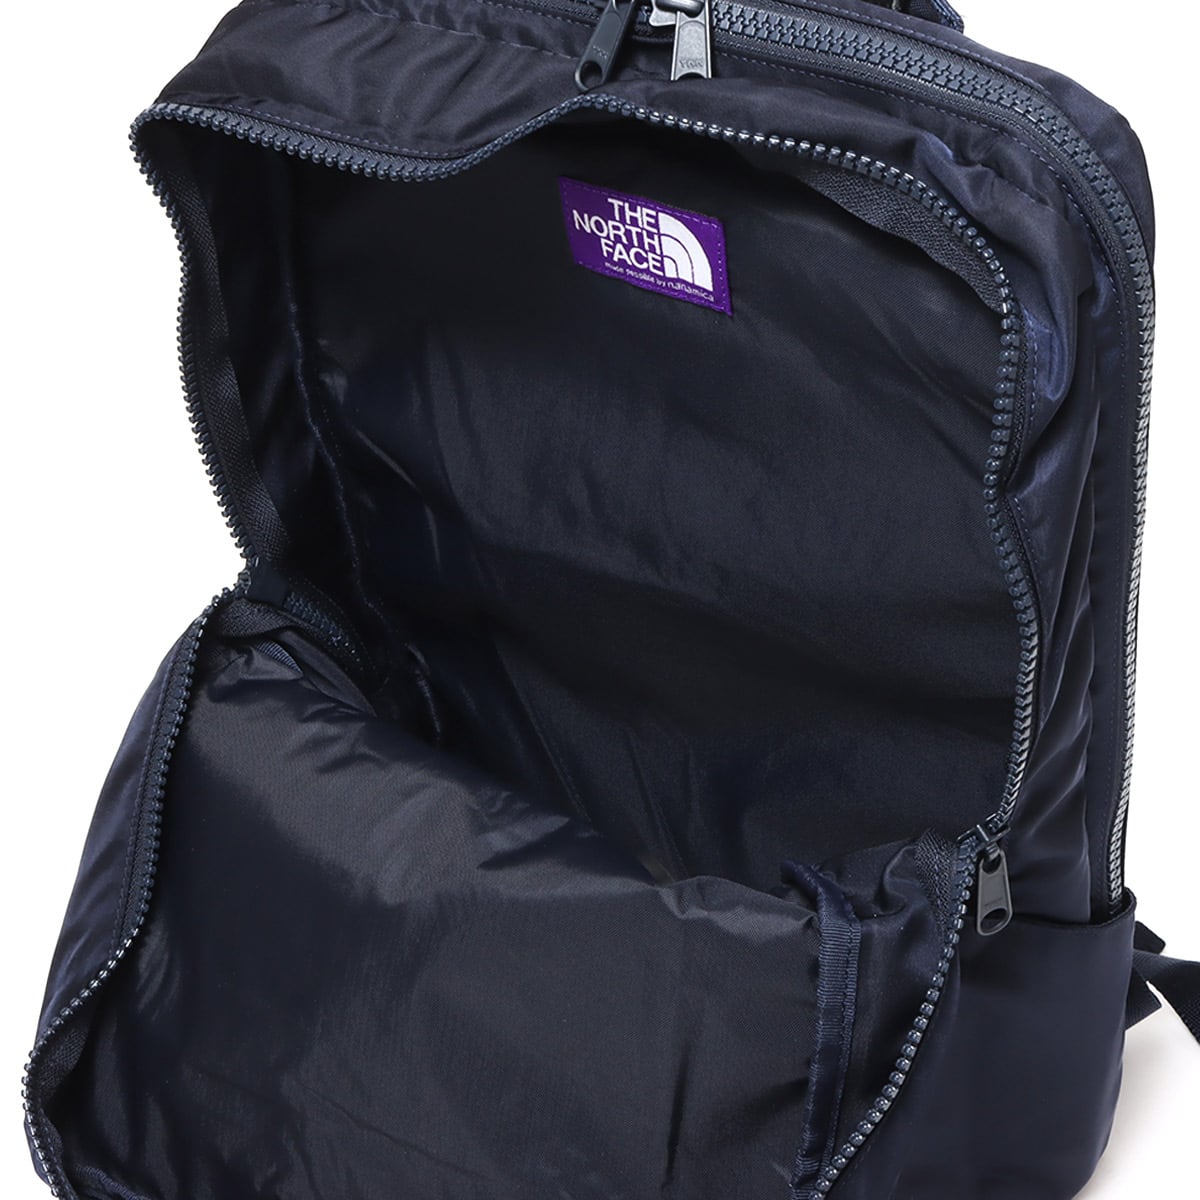 THE NORTH FACE LIMONTA Day Pack Navy写真撮影のために開封致しました